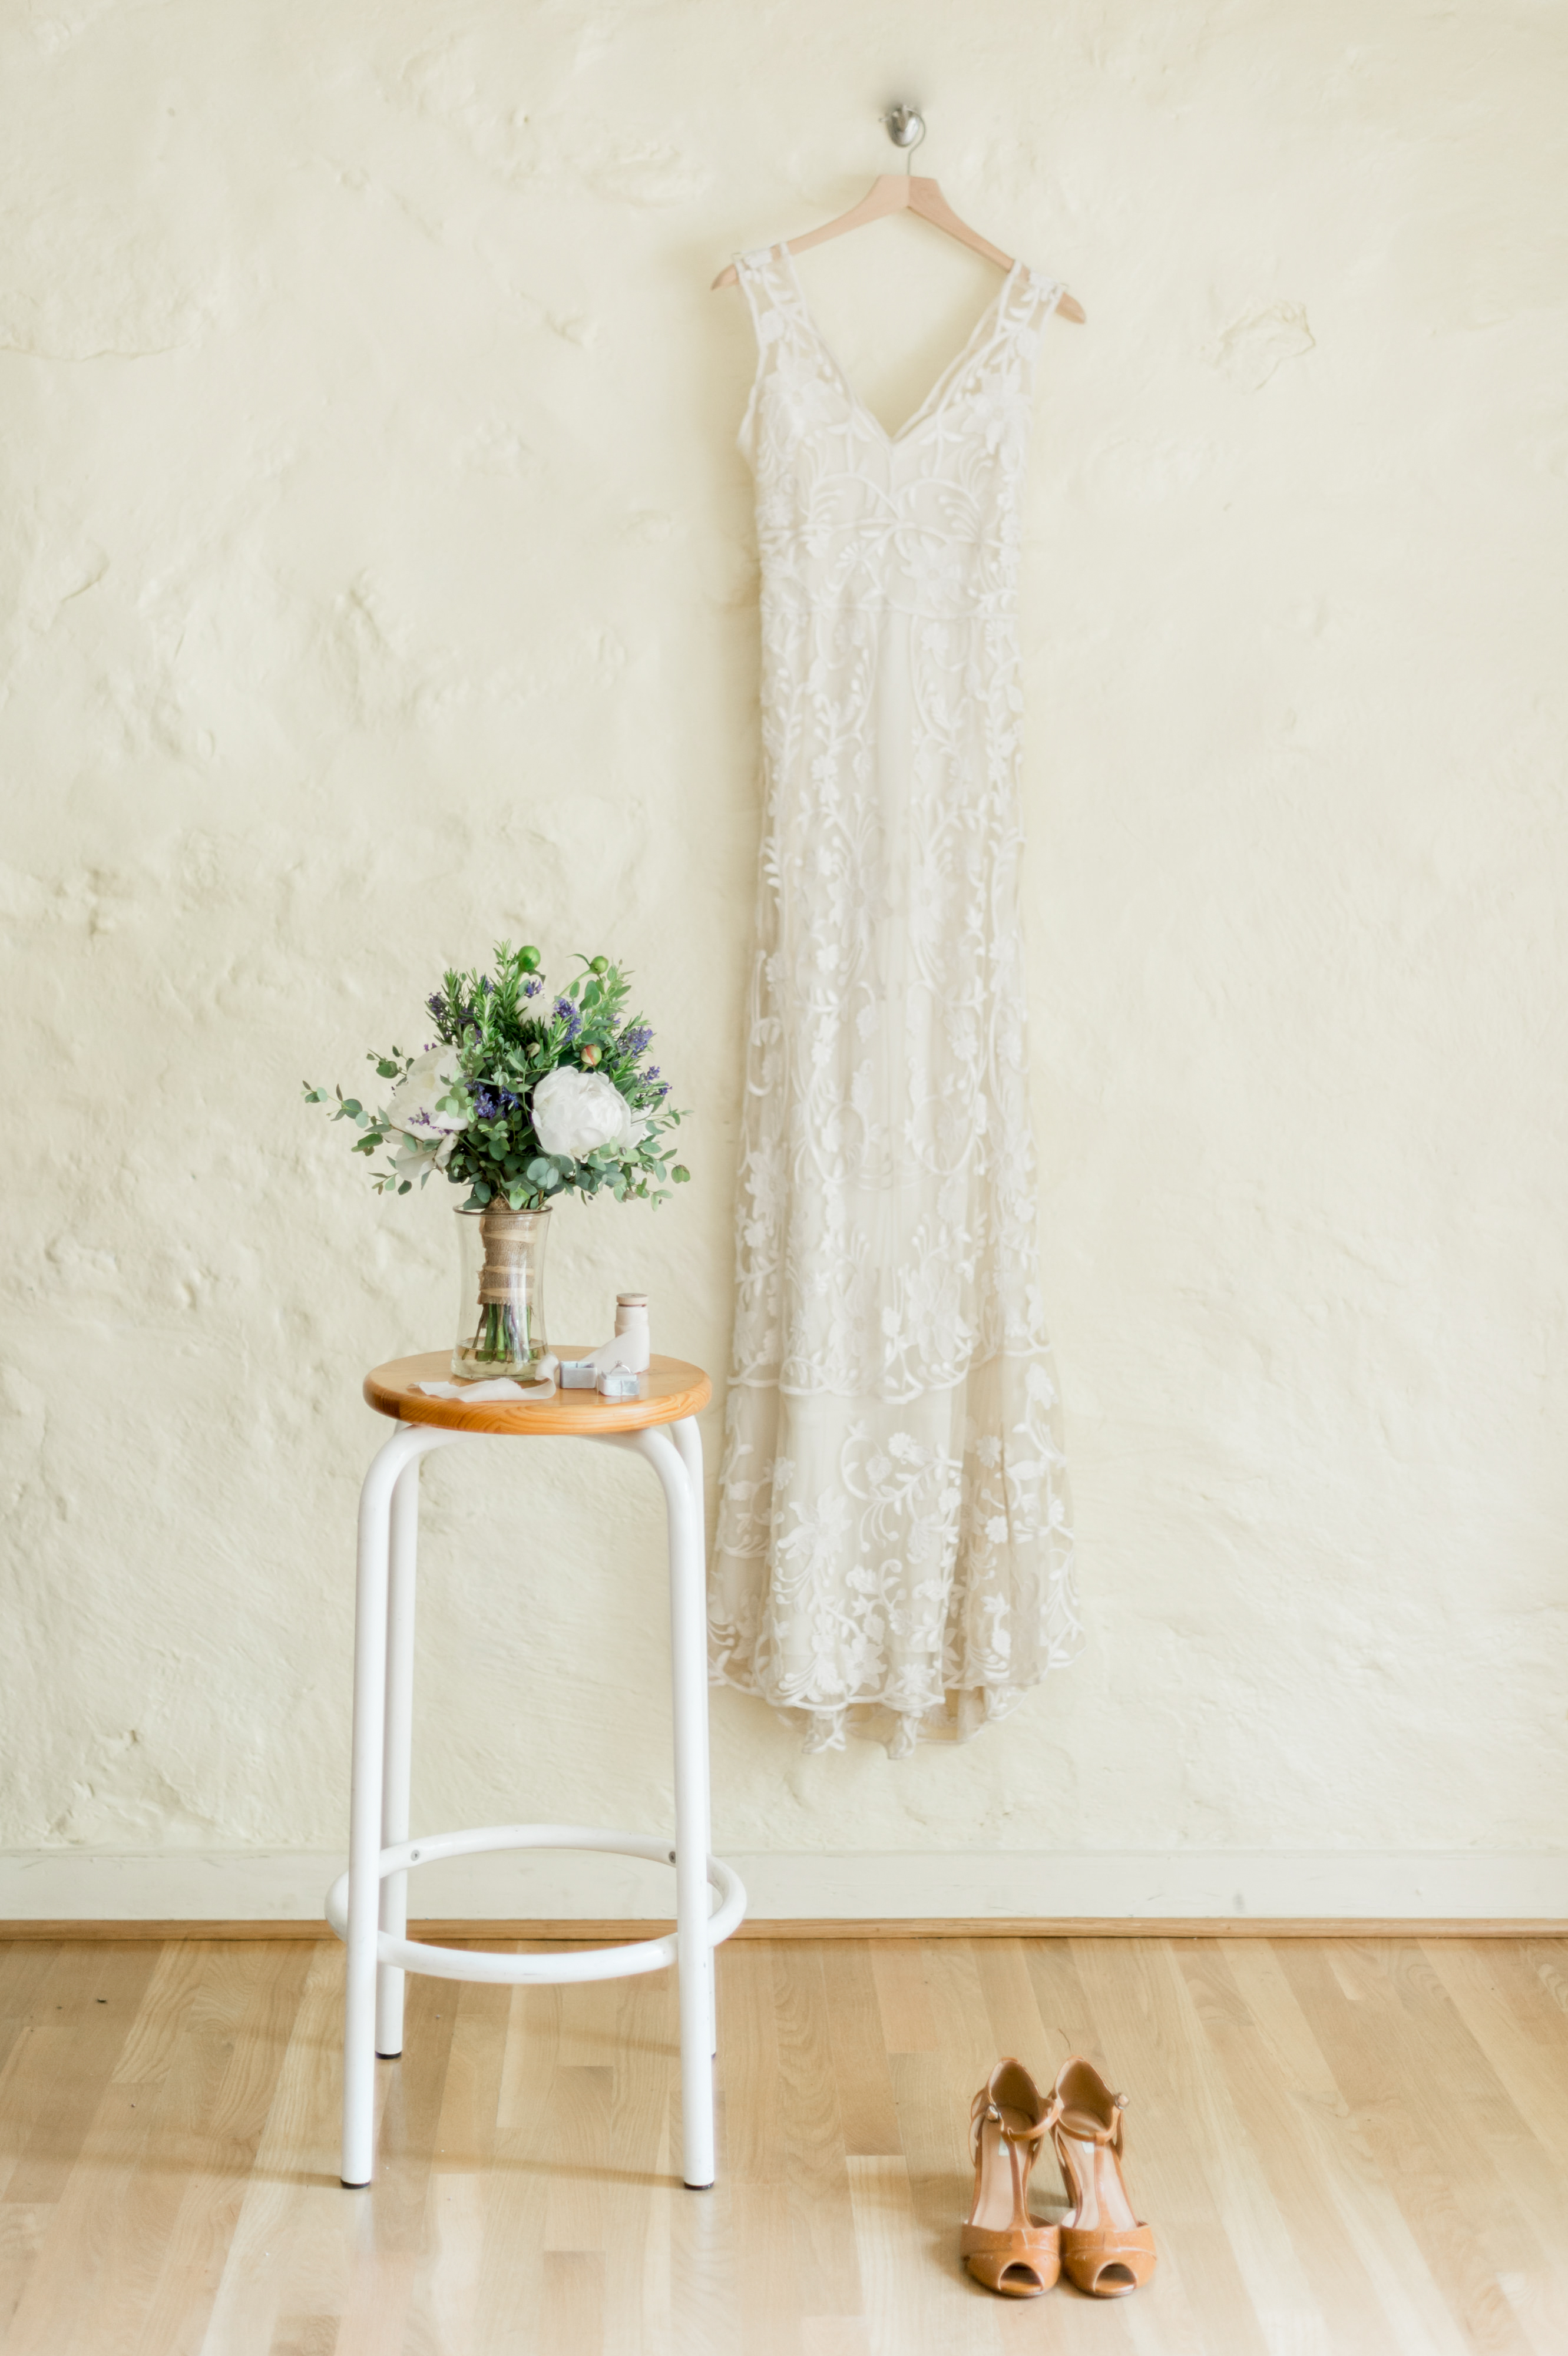 BHLDN - the Perfect Bridal Boutique